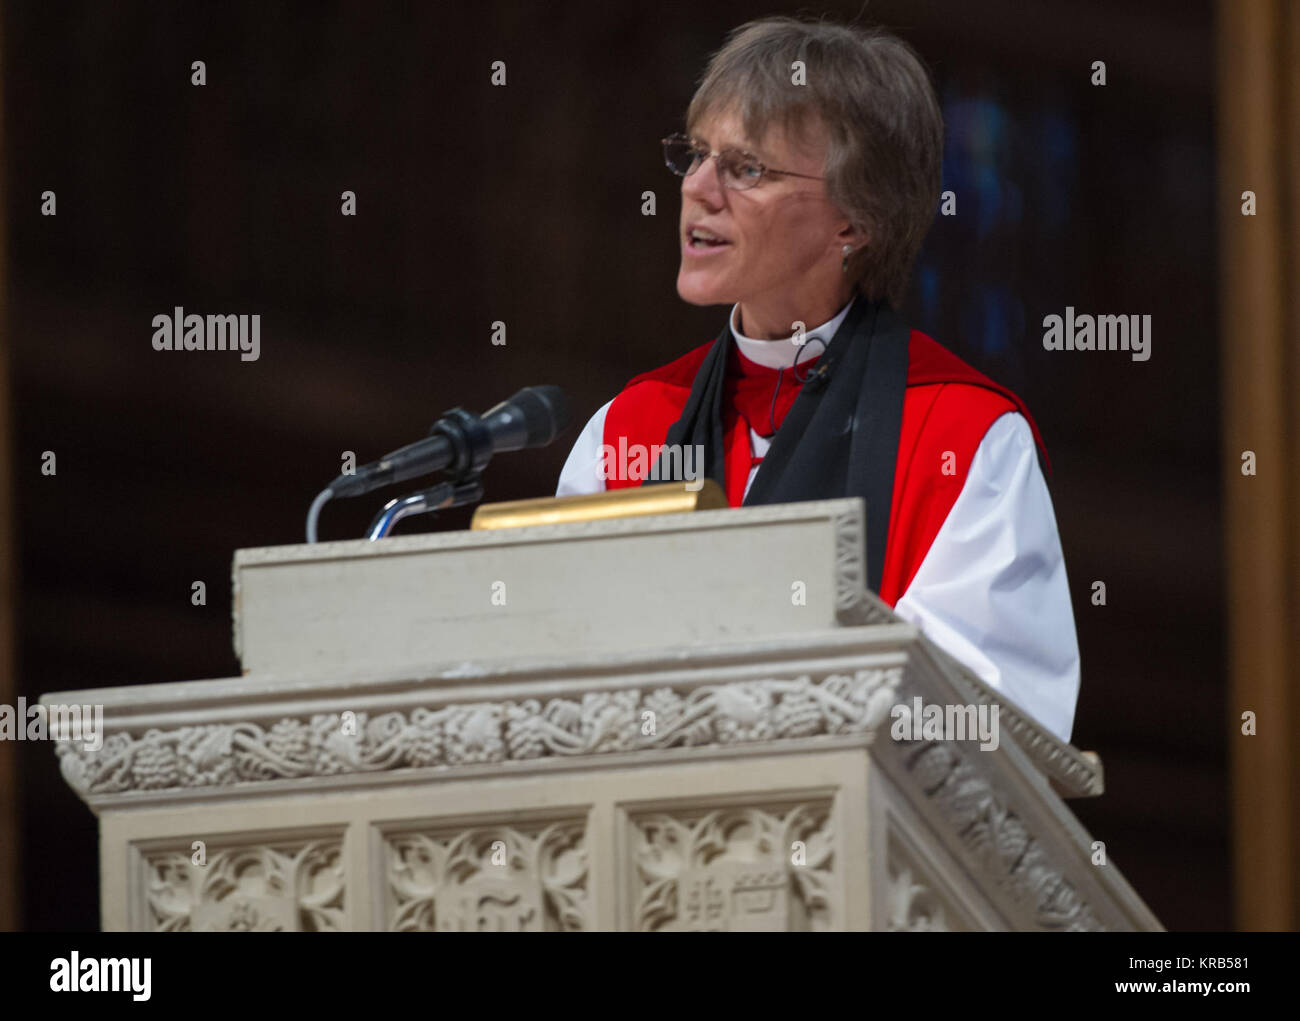 The Right Rev. Mariann Edgar Budde, bishop of Washington, delivers the Homily during a memorial service celebrating the life of Neil Armstrong at the Washington National Cathedral, Thursday, Sept. 13, 2012. Armstrong, the first man to walk on the moon during the 1969 Apollo 11 mission, died Saturday, Aug. 25. He was 82. Photo Credit:(NASA/Paul E. Alers) Neil Armstrong public memorial service (201209130017HQ) Stock Photo